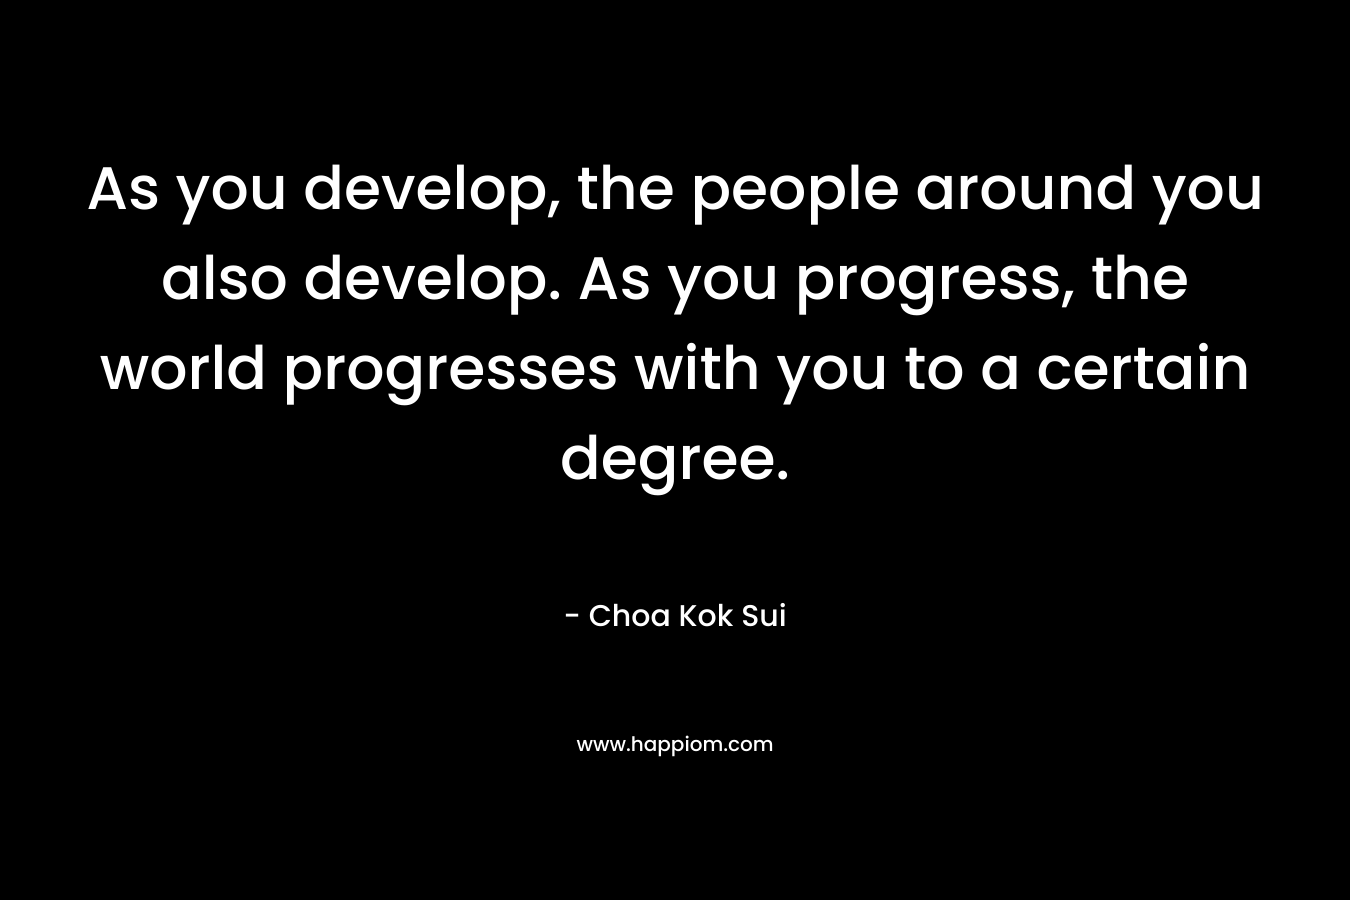 As you develop, the people around you also develop. As you progress, the world progresses with you to a certain degree.